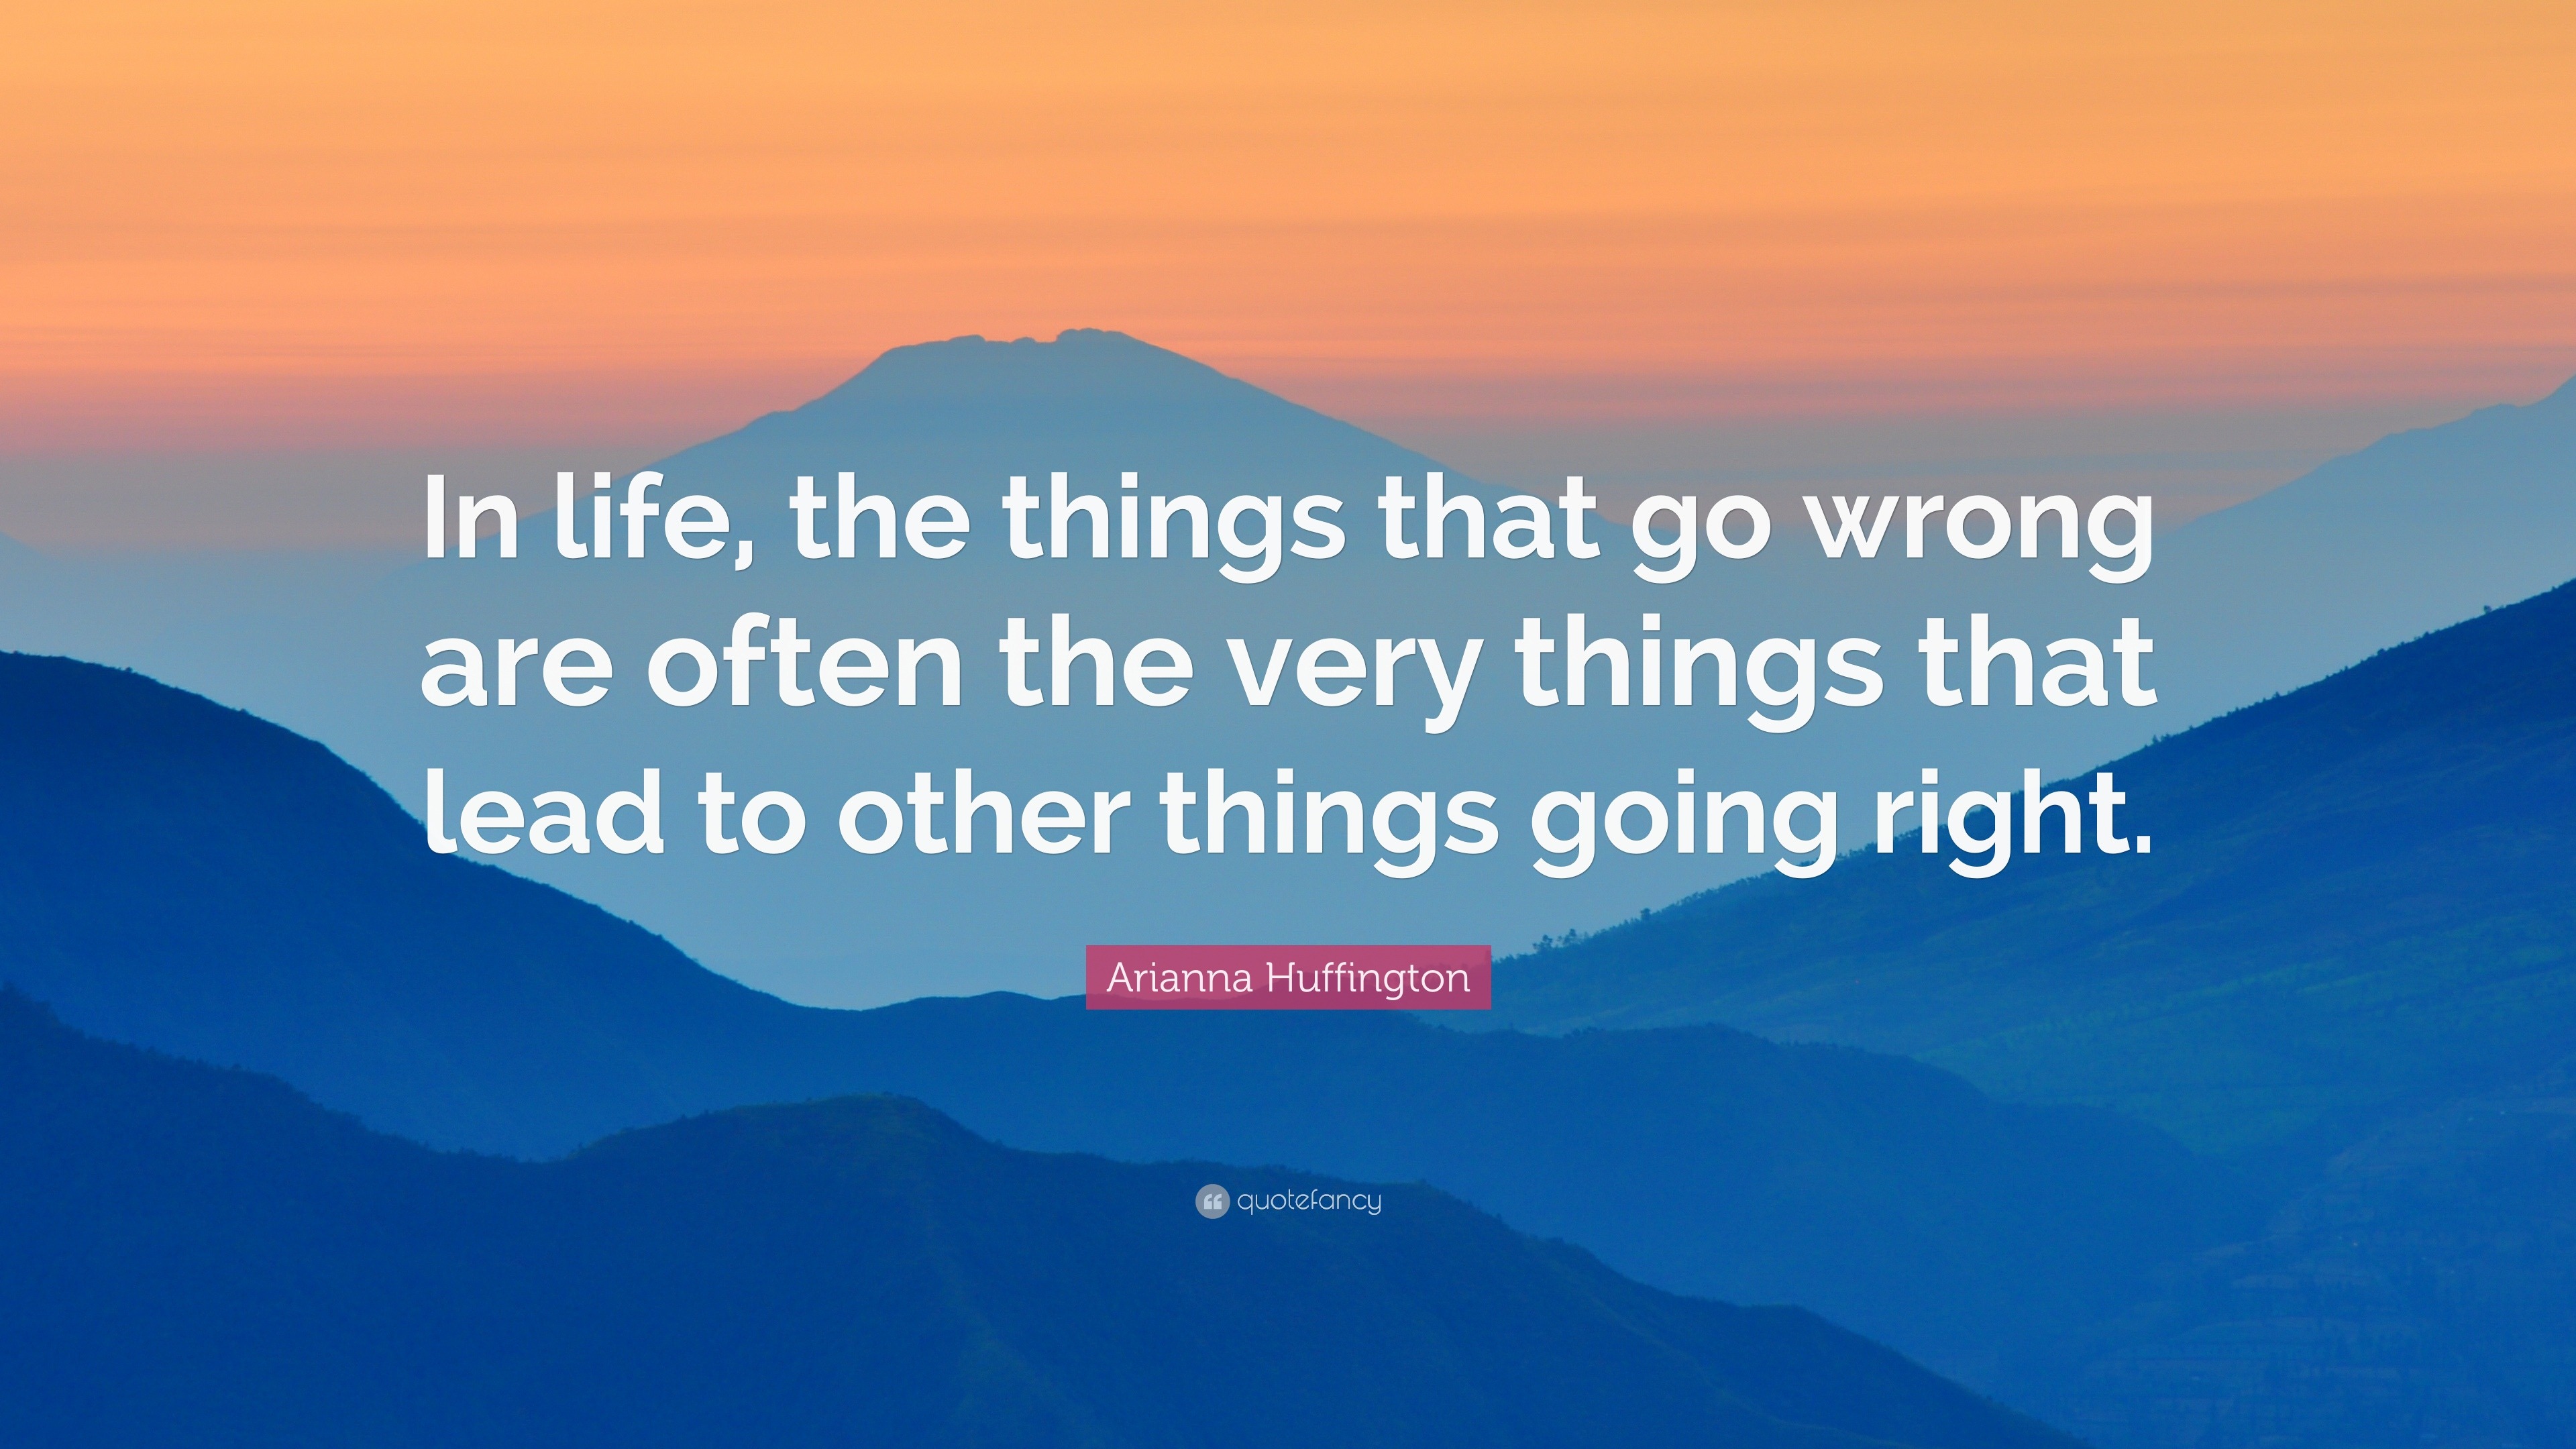 Arianna Huffington Quote: “In life, the things that go wrong are often the  very things that